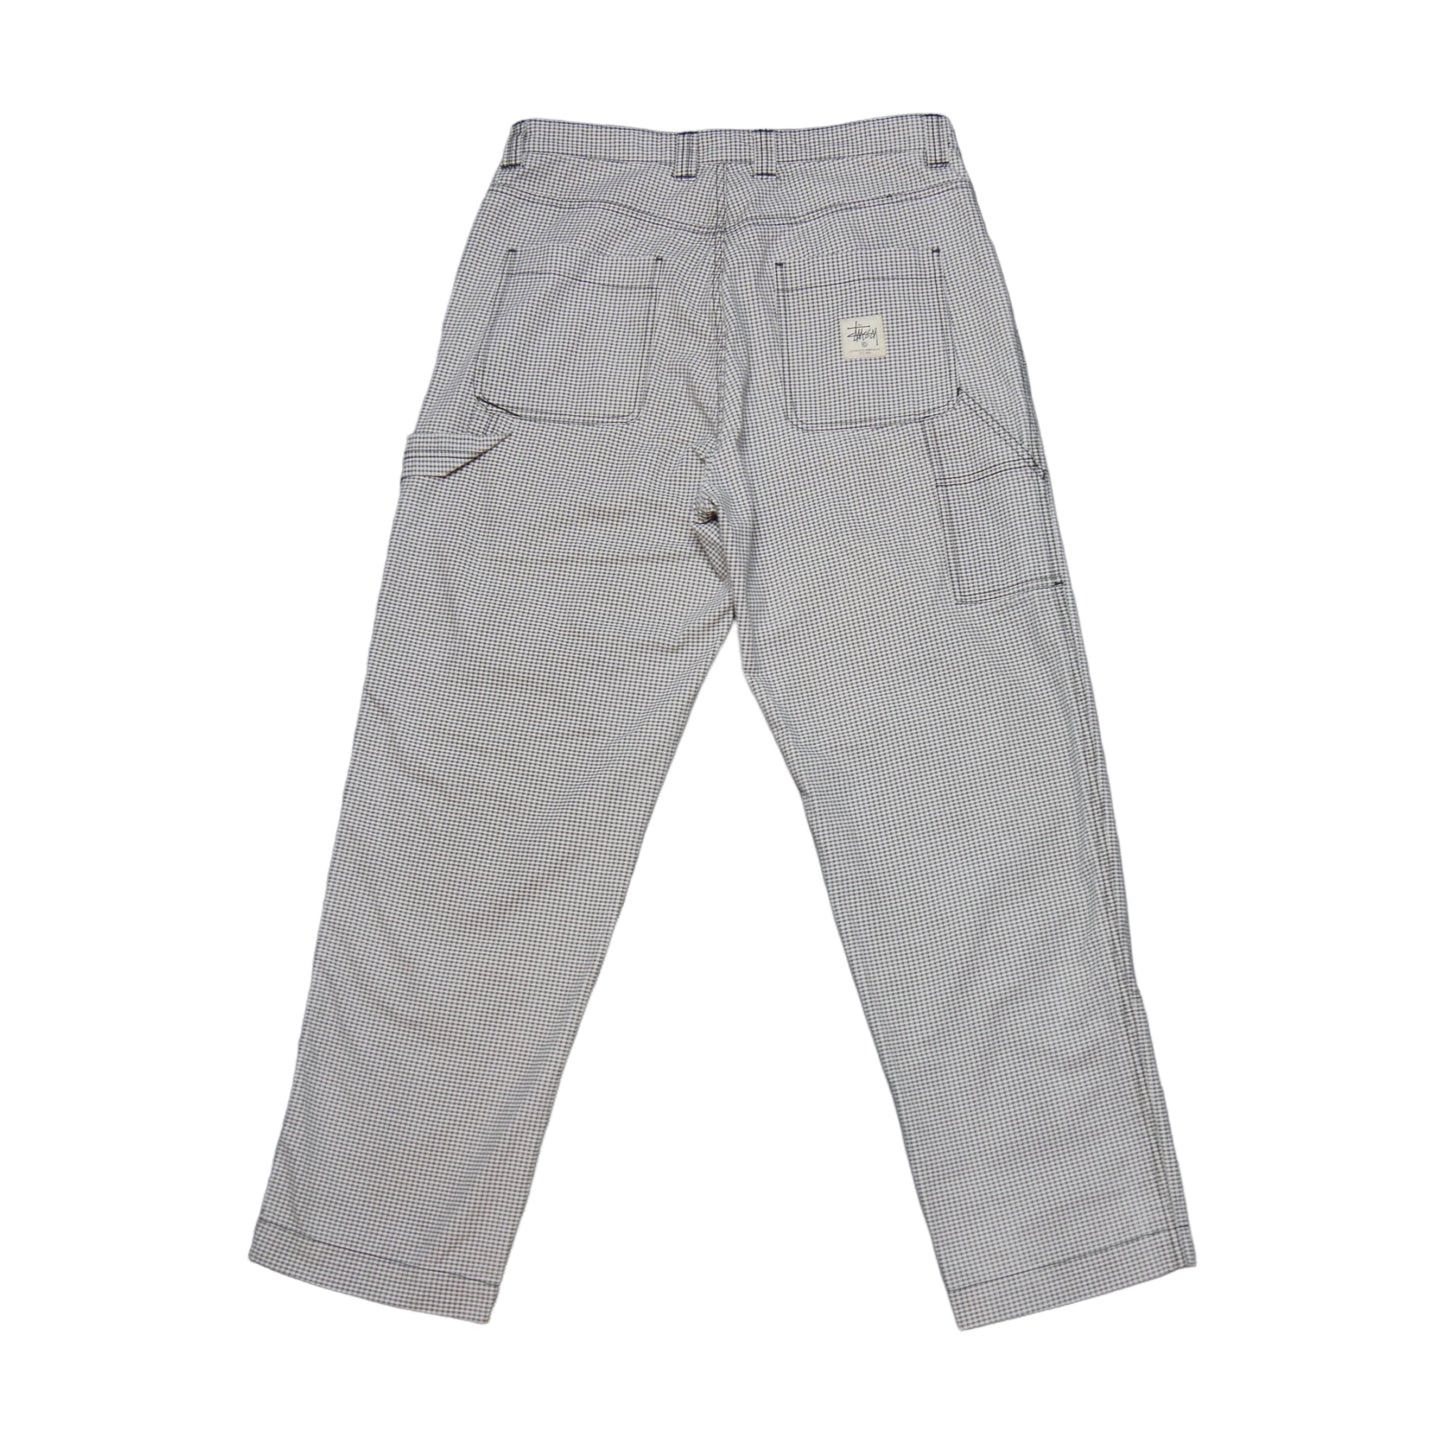 Stussy Double Knee Checkered Pants - 32